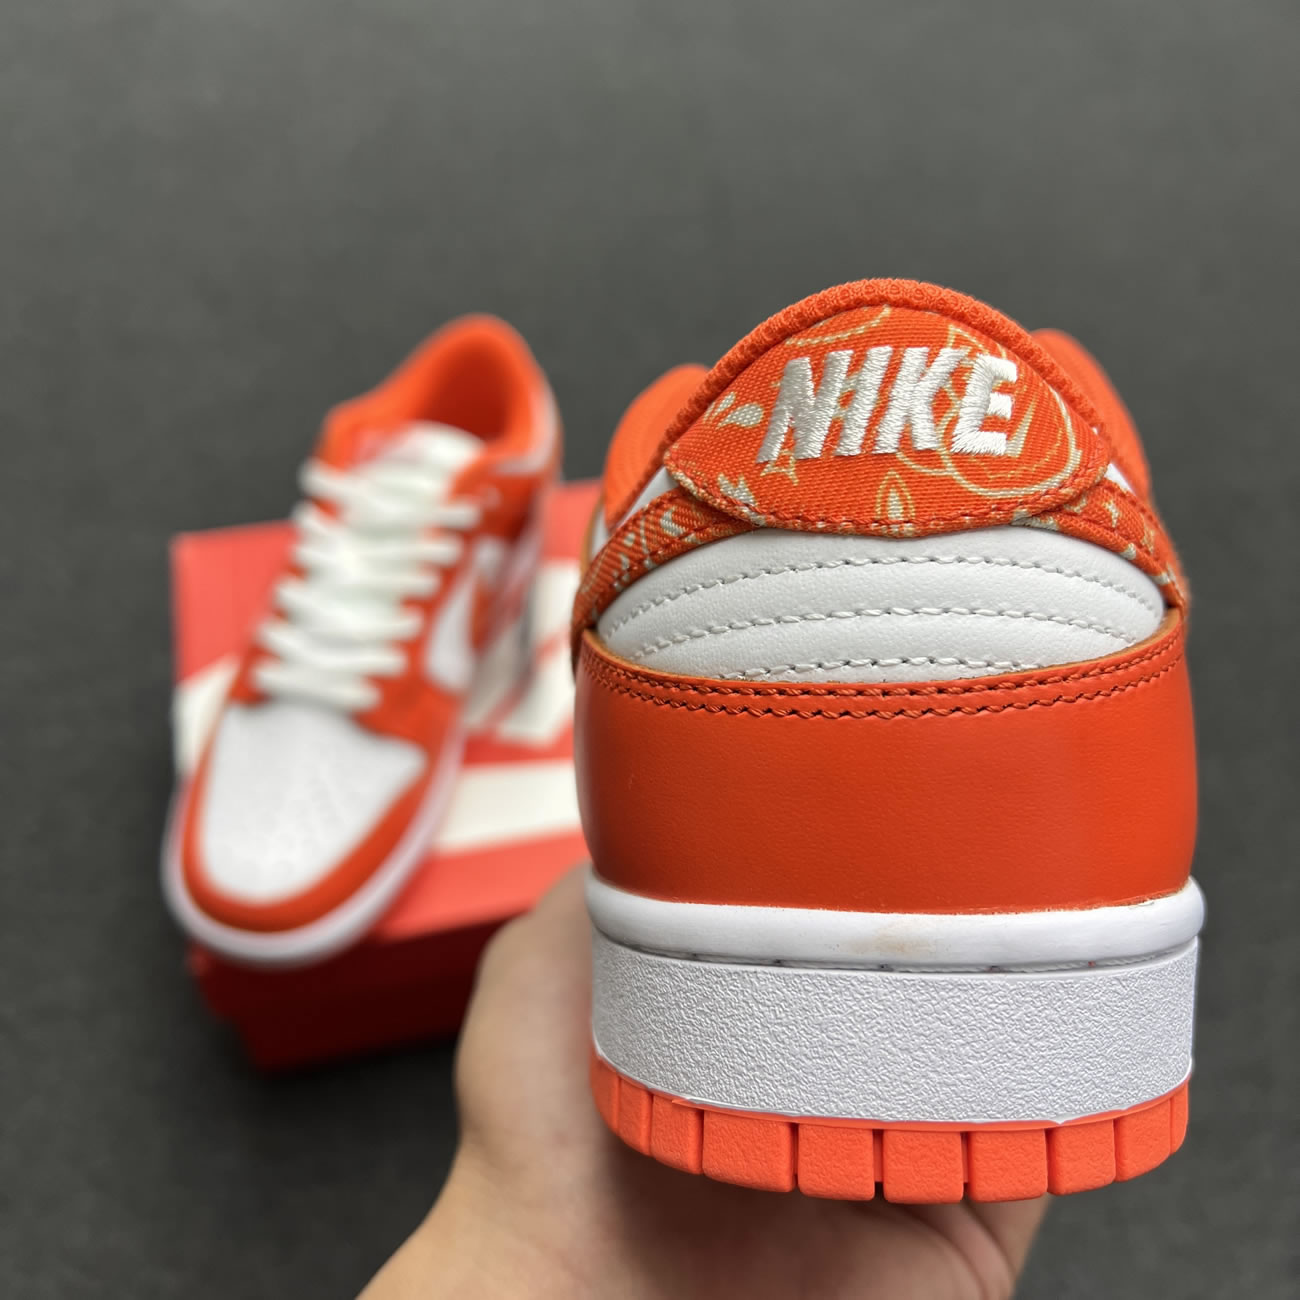 Nike Dunk Low Essential Paisley Pack Orange W Dh4401 103 (4) - newkick.org